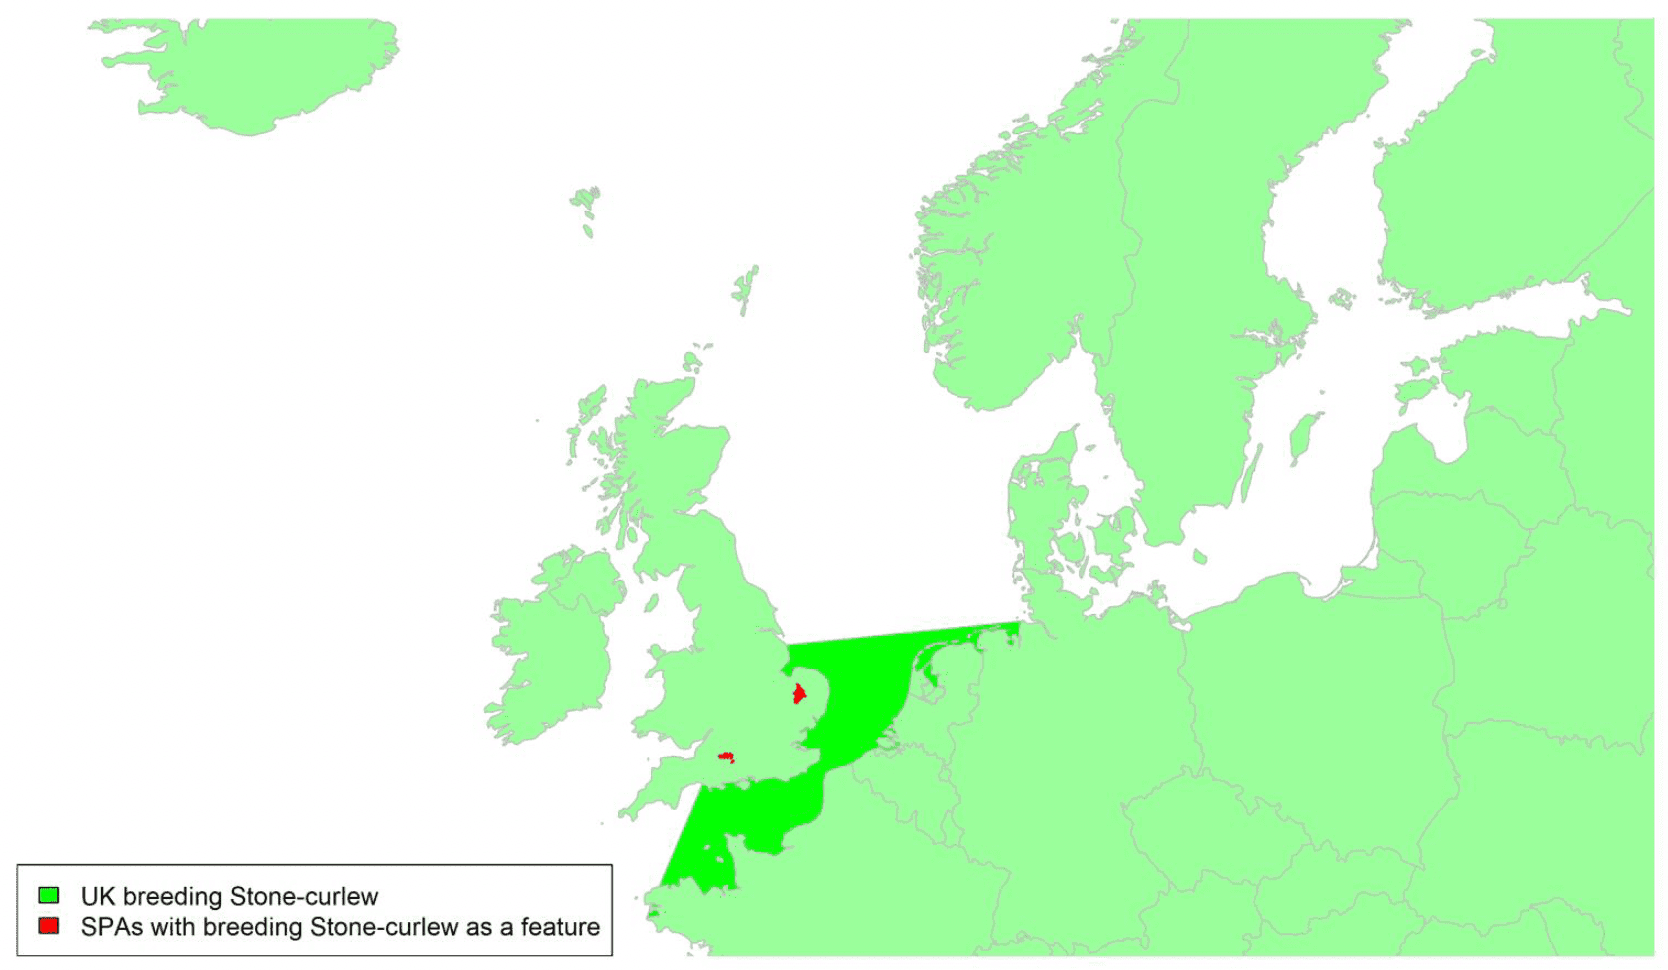 Map of North West Europe showing migratory routes and SPAs within the UK for Stone-curlew as described in the text below.